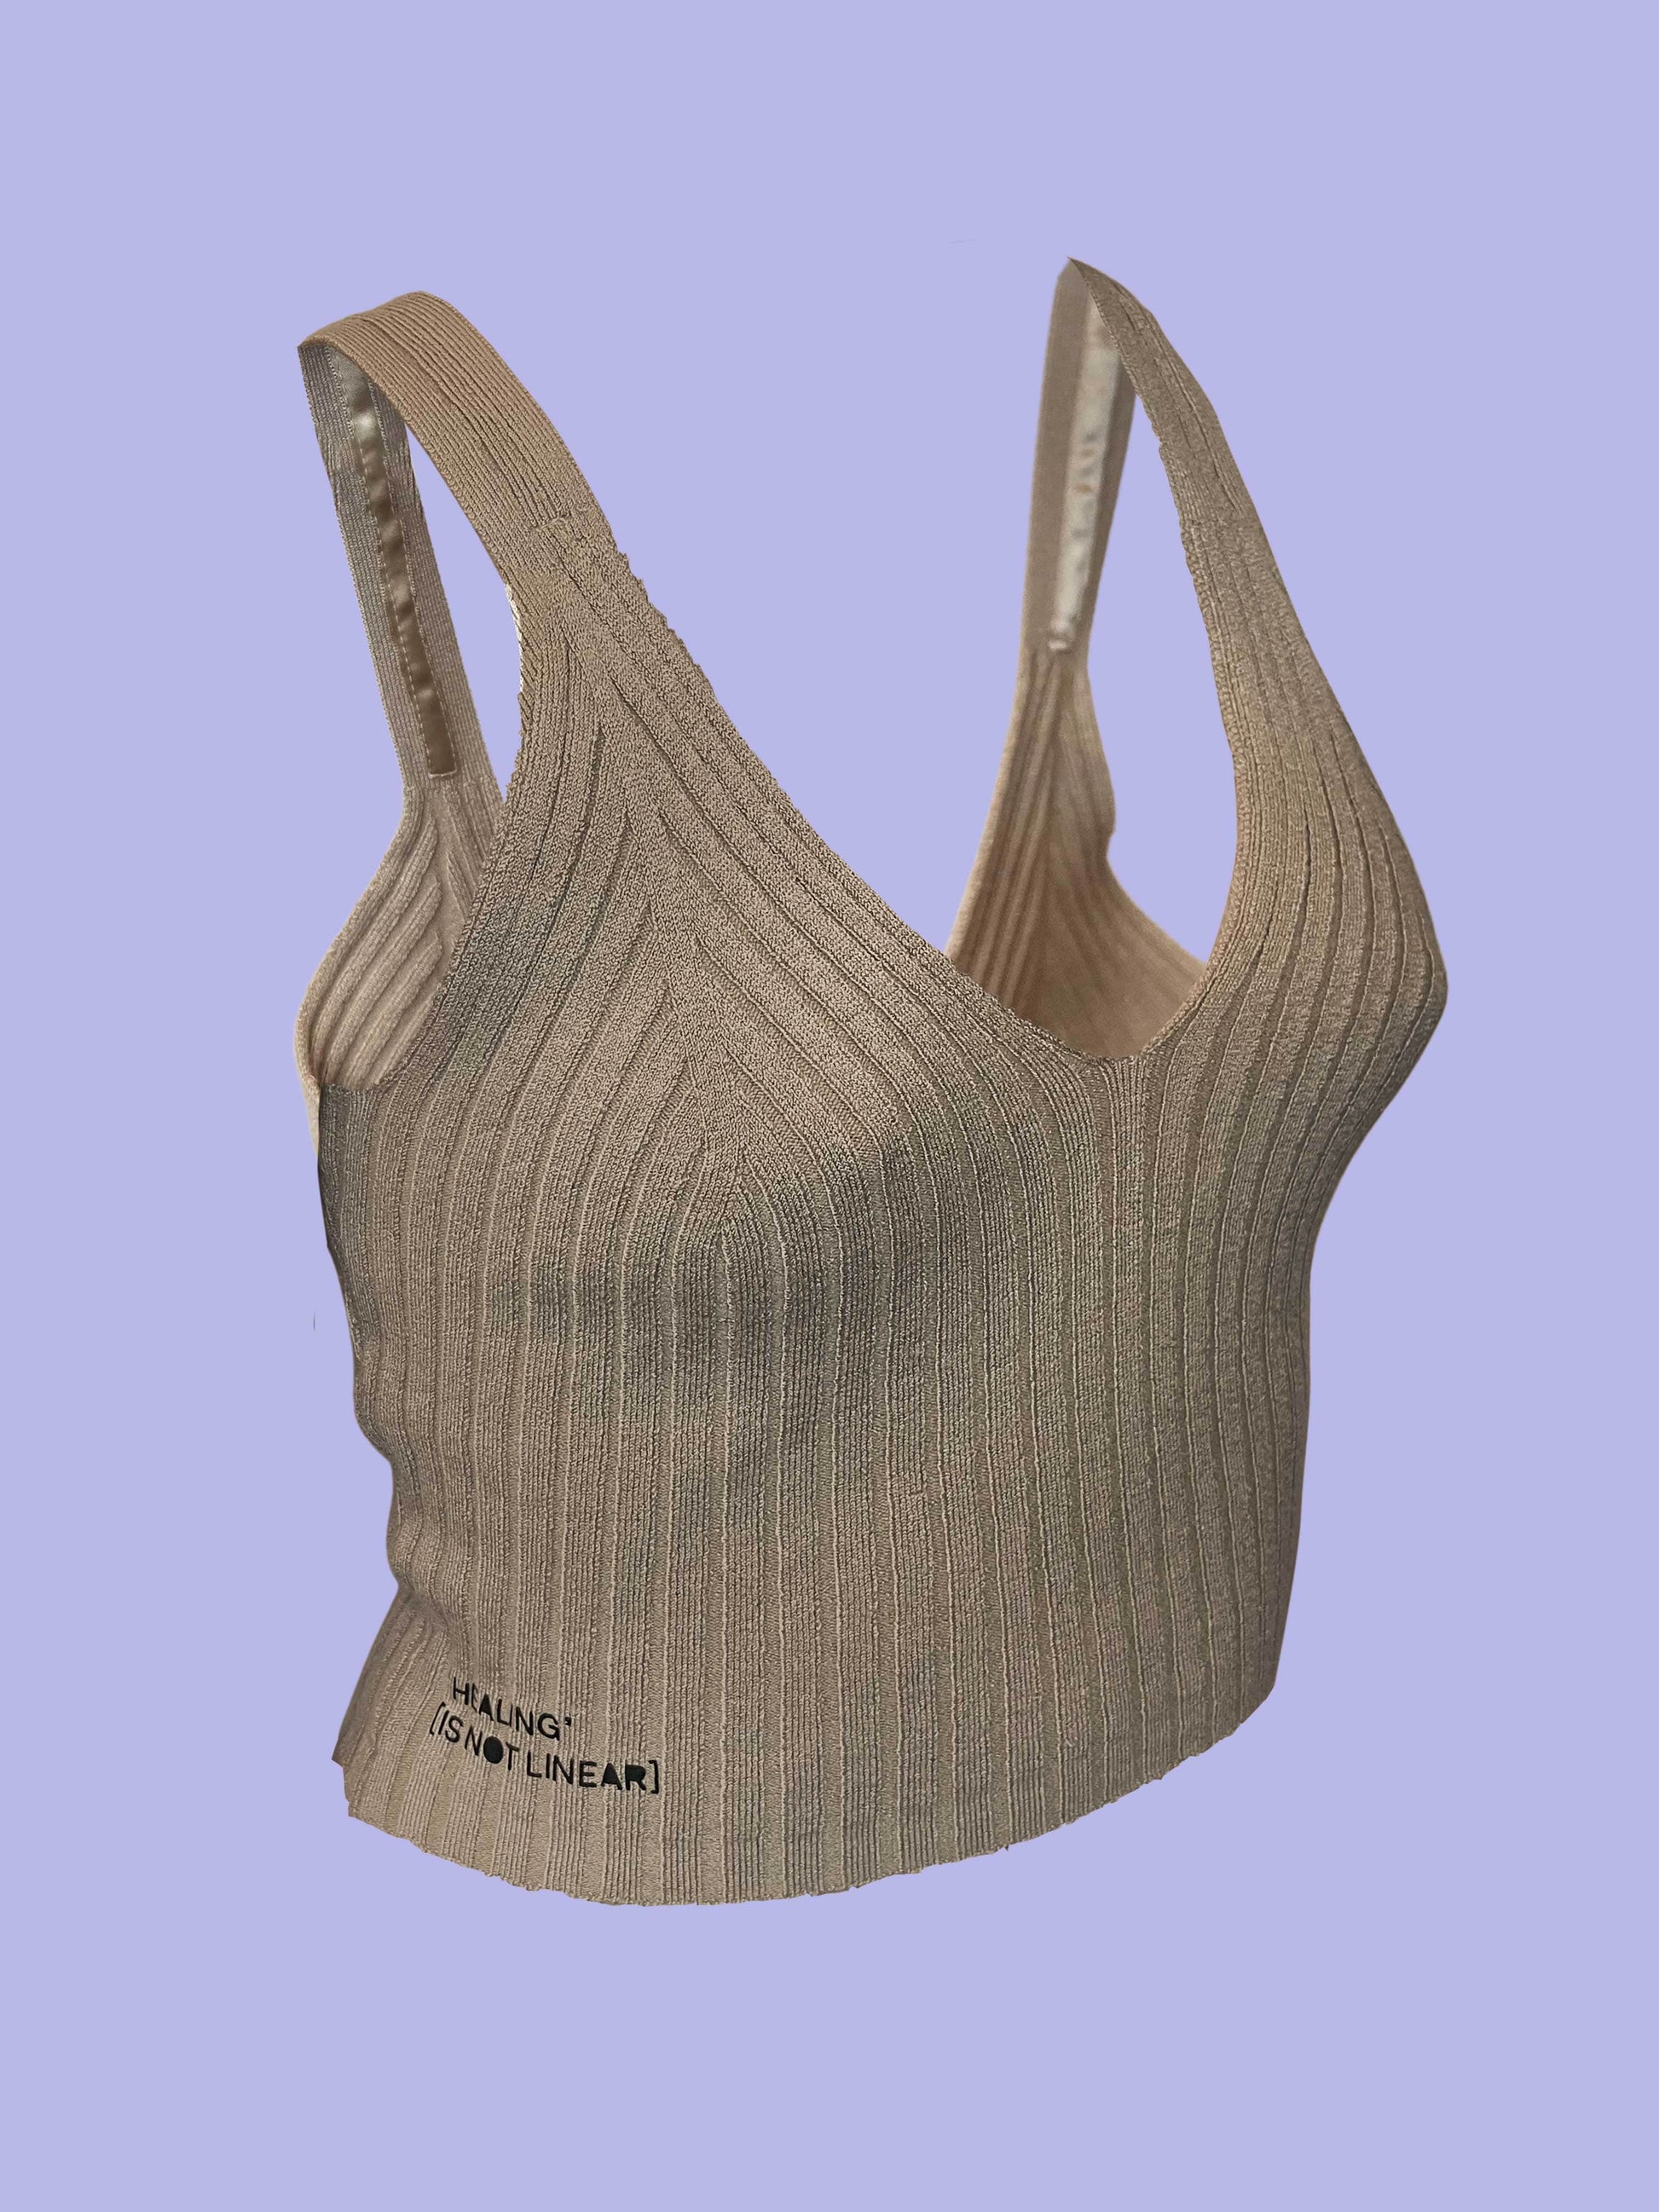 This is The Remix Top HEALING IS NOT LINEAR - Knitted Crop Top in Beige